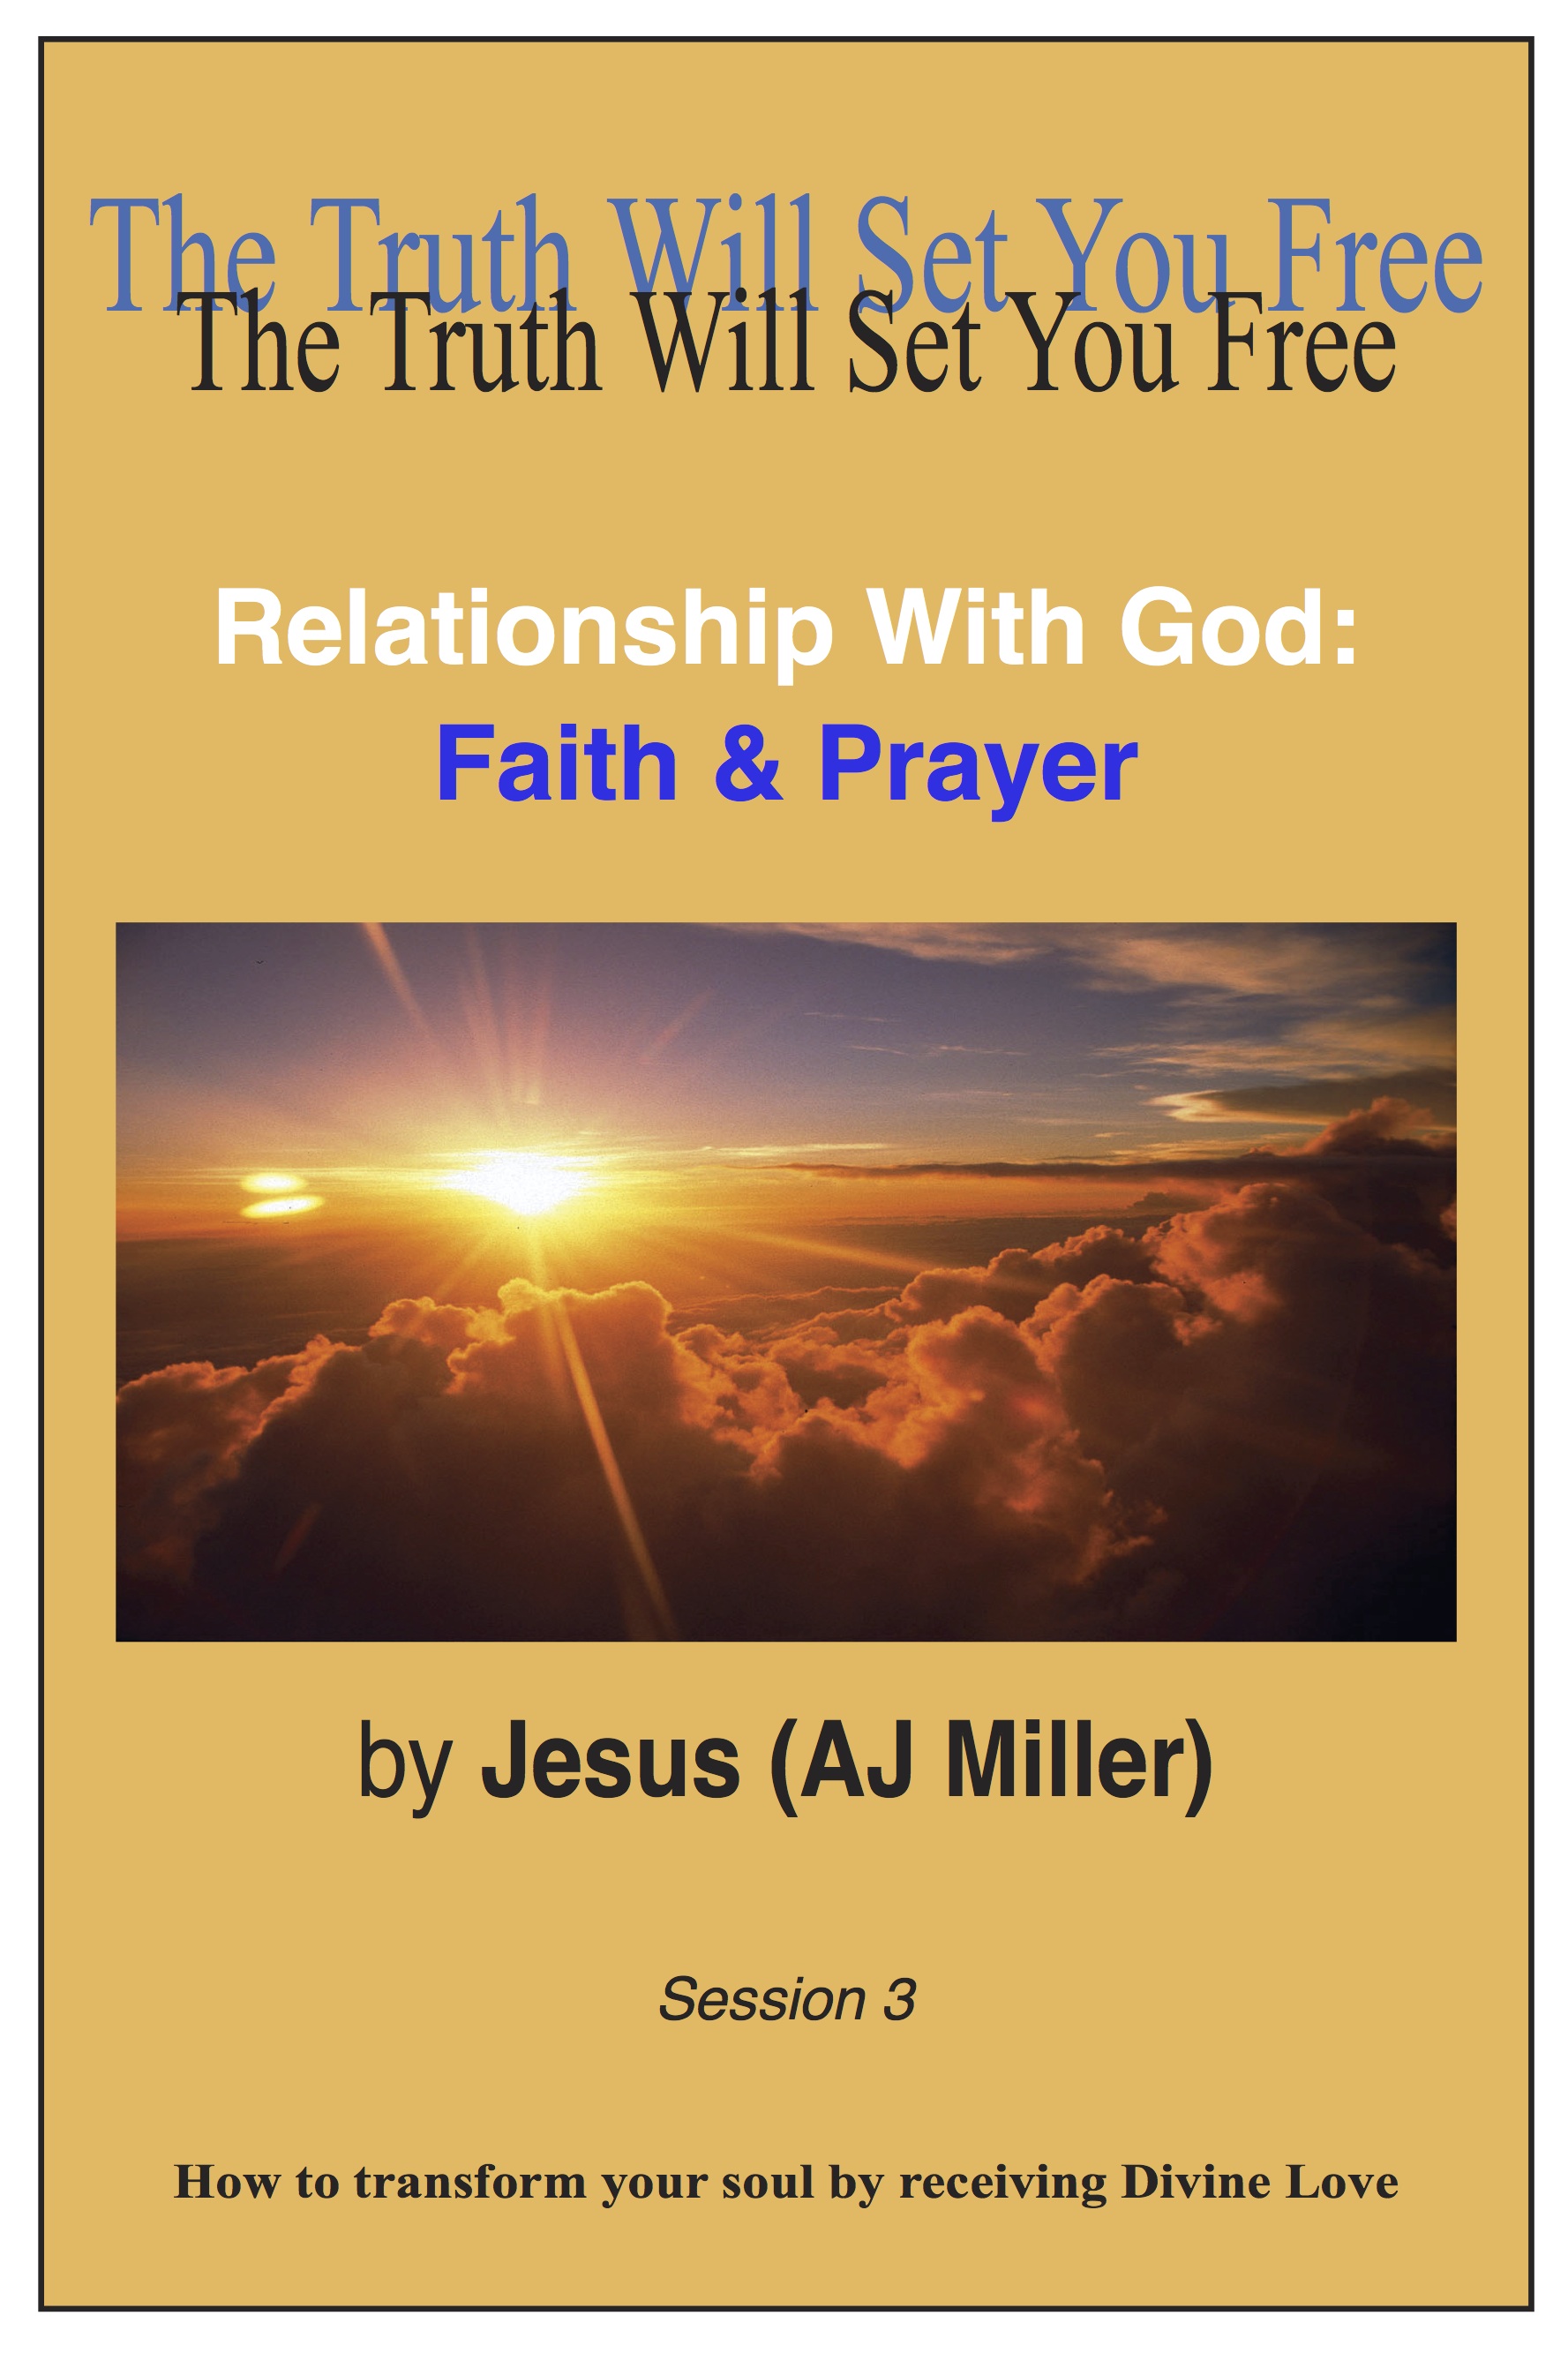 a love relationship with god